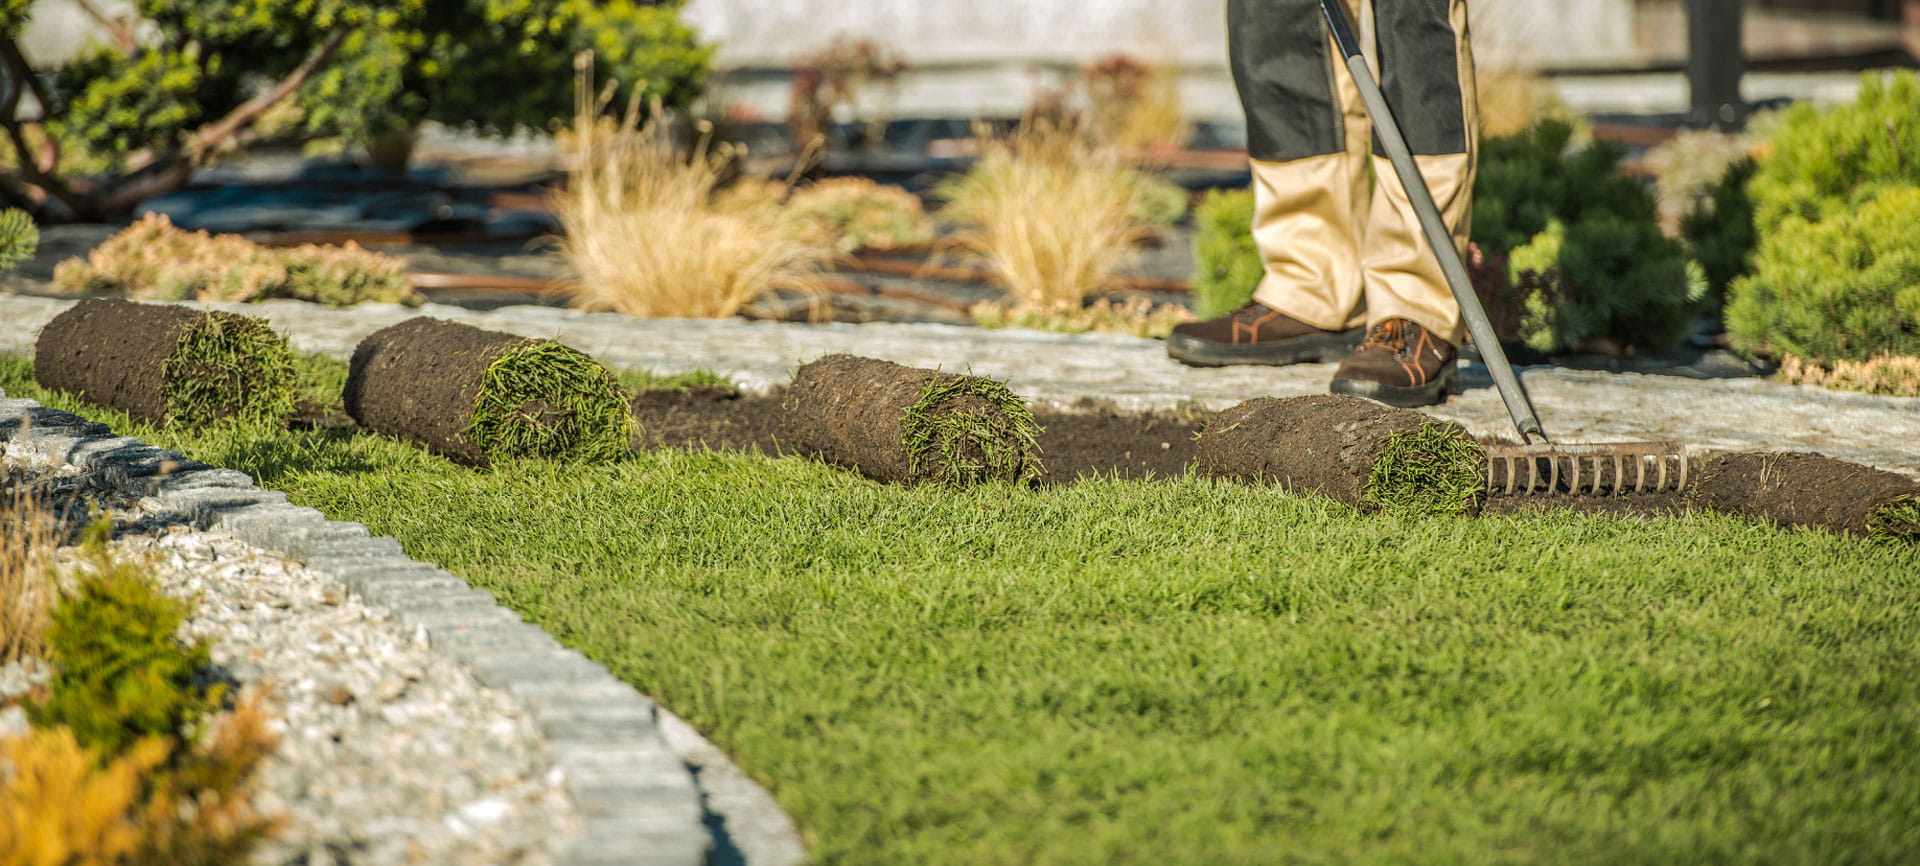 Rock Your Landscape: The Benefits of River Rock Pathways